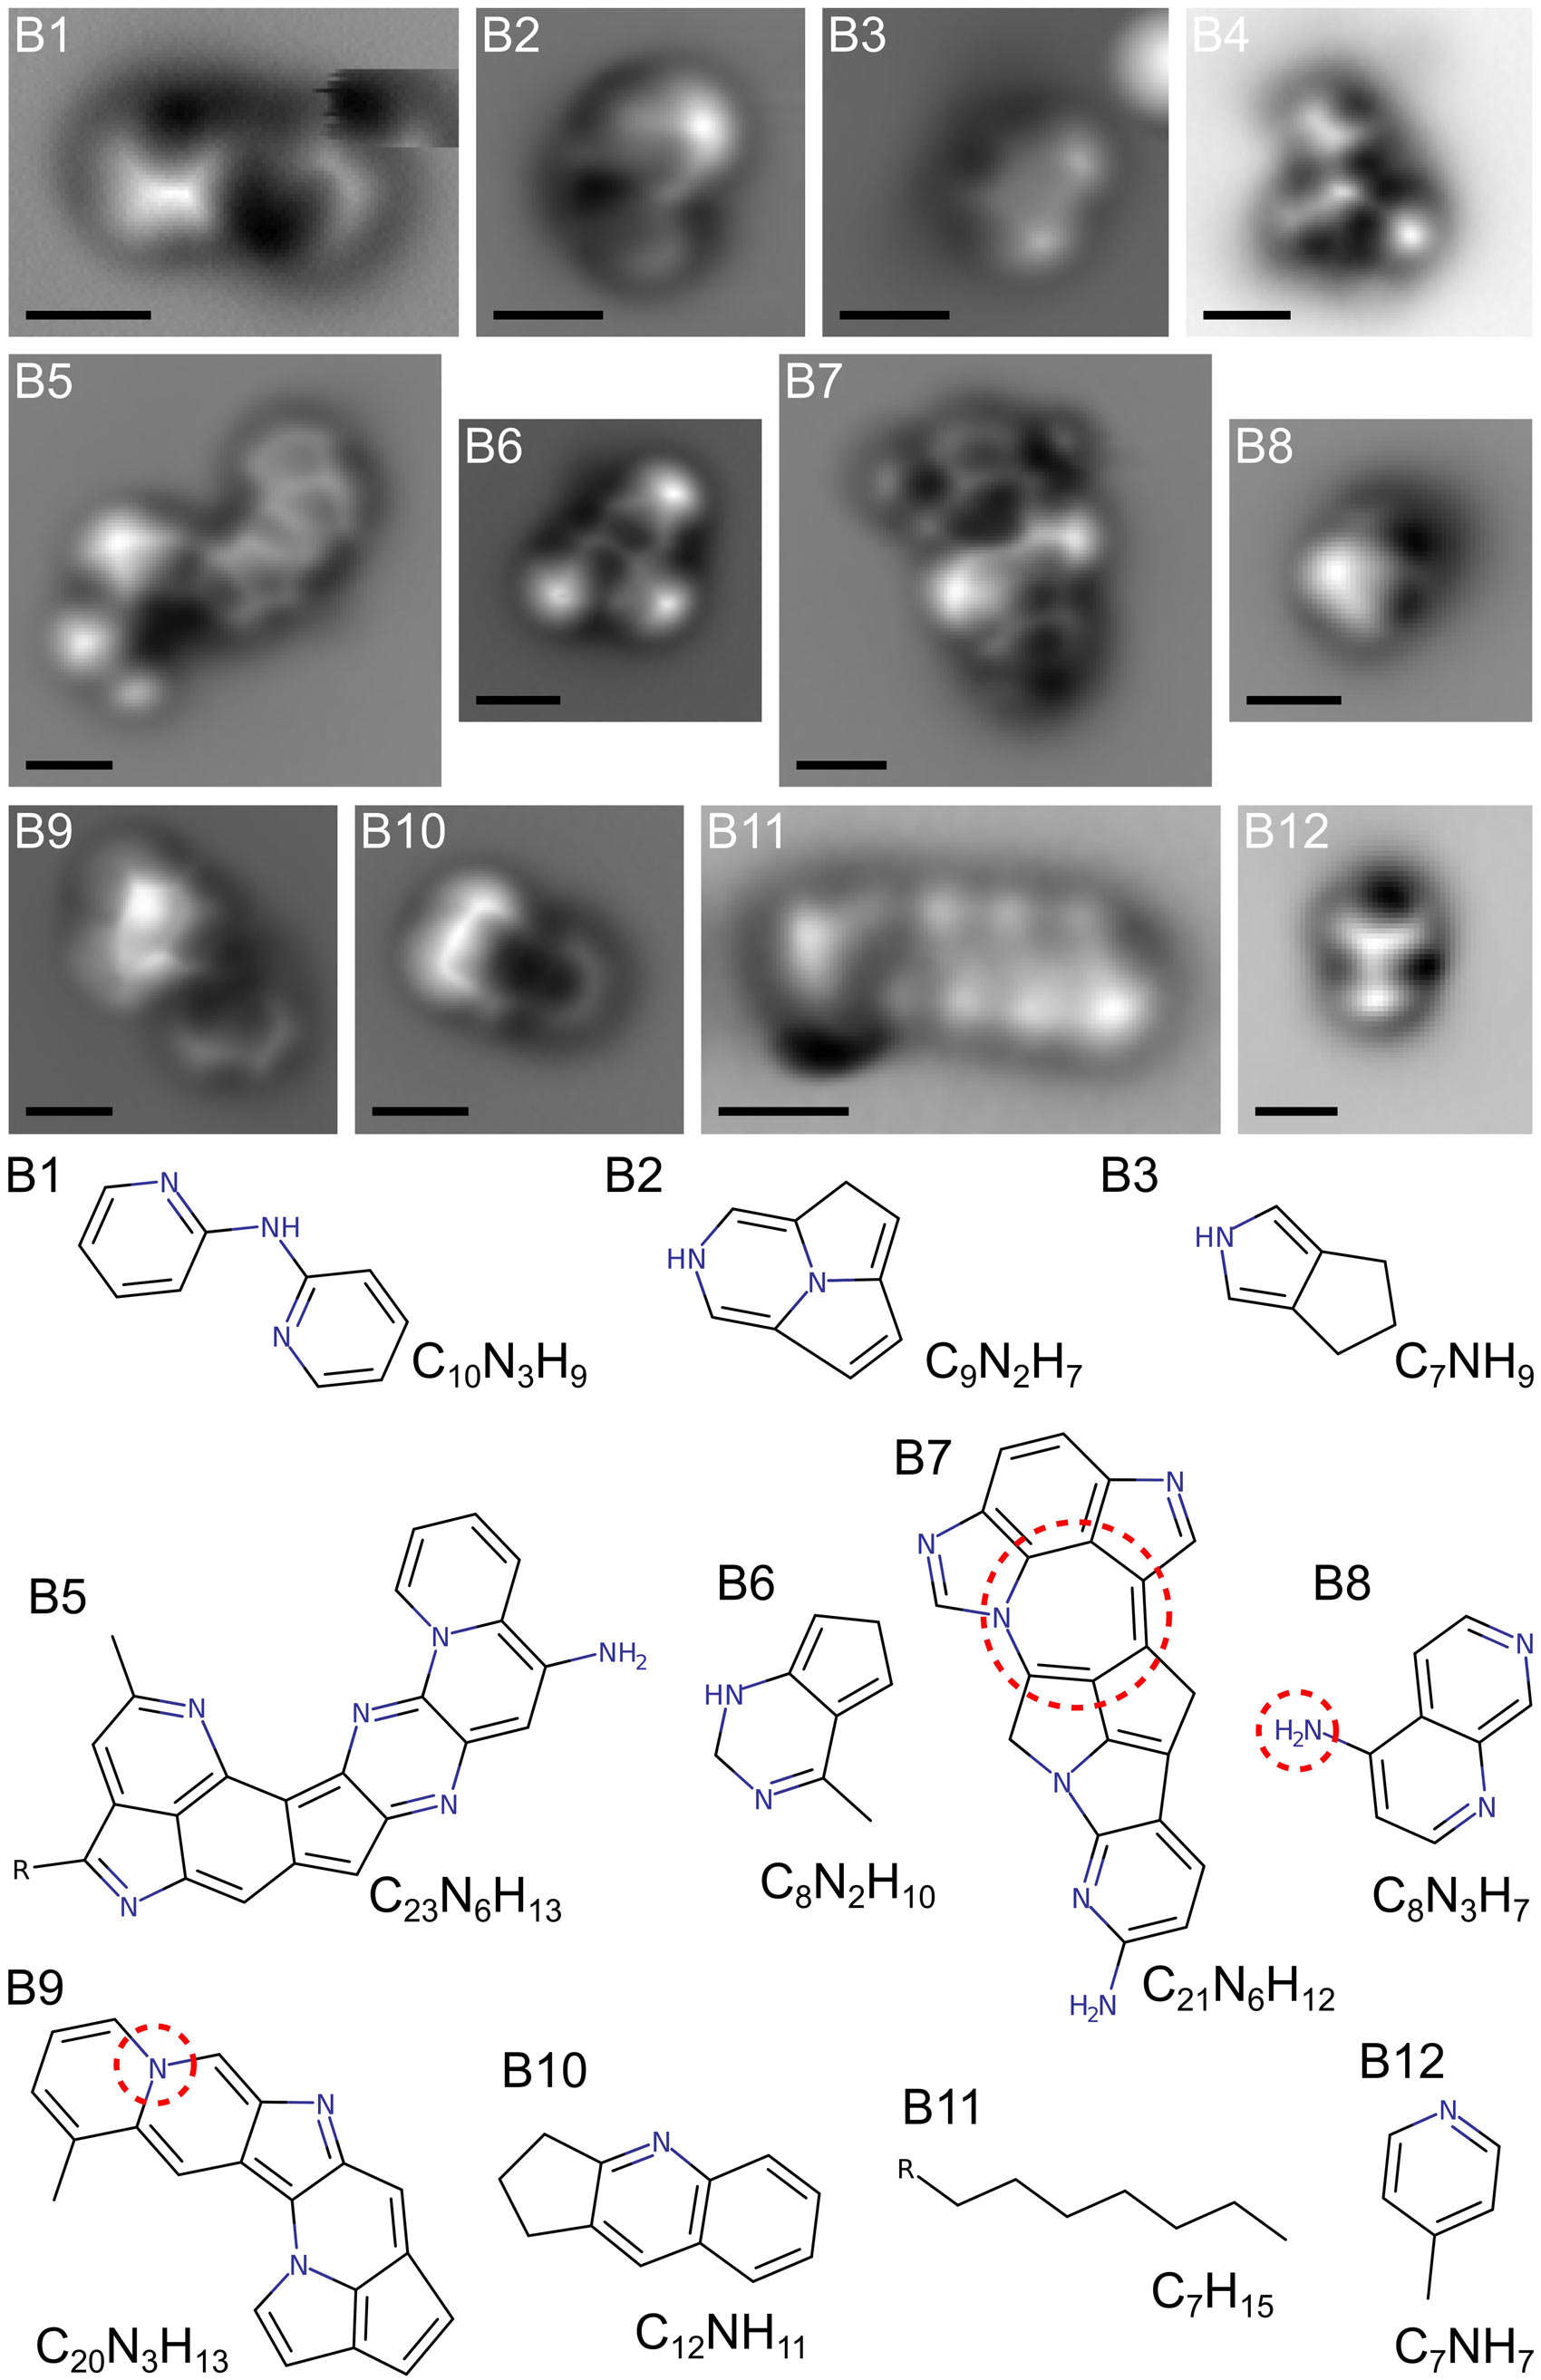 Atomic force microscopy images (top) of some simple and more complicated molecules created in a lab to mimic Titan’s haze, with their assigned chemical structures outlined (bottom). Credit: The Astrophysical Journal (CC BY-ND 2.0)